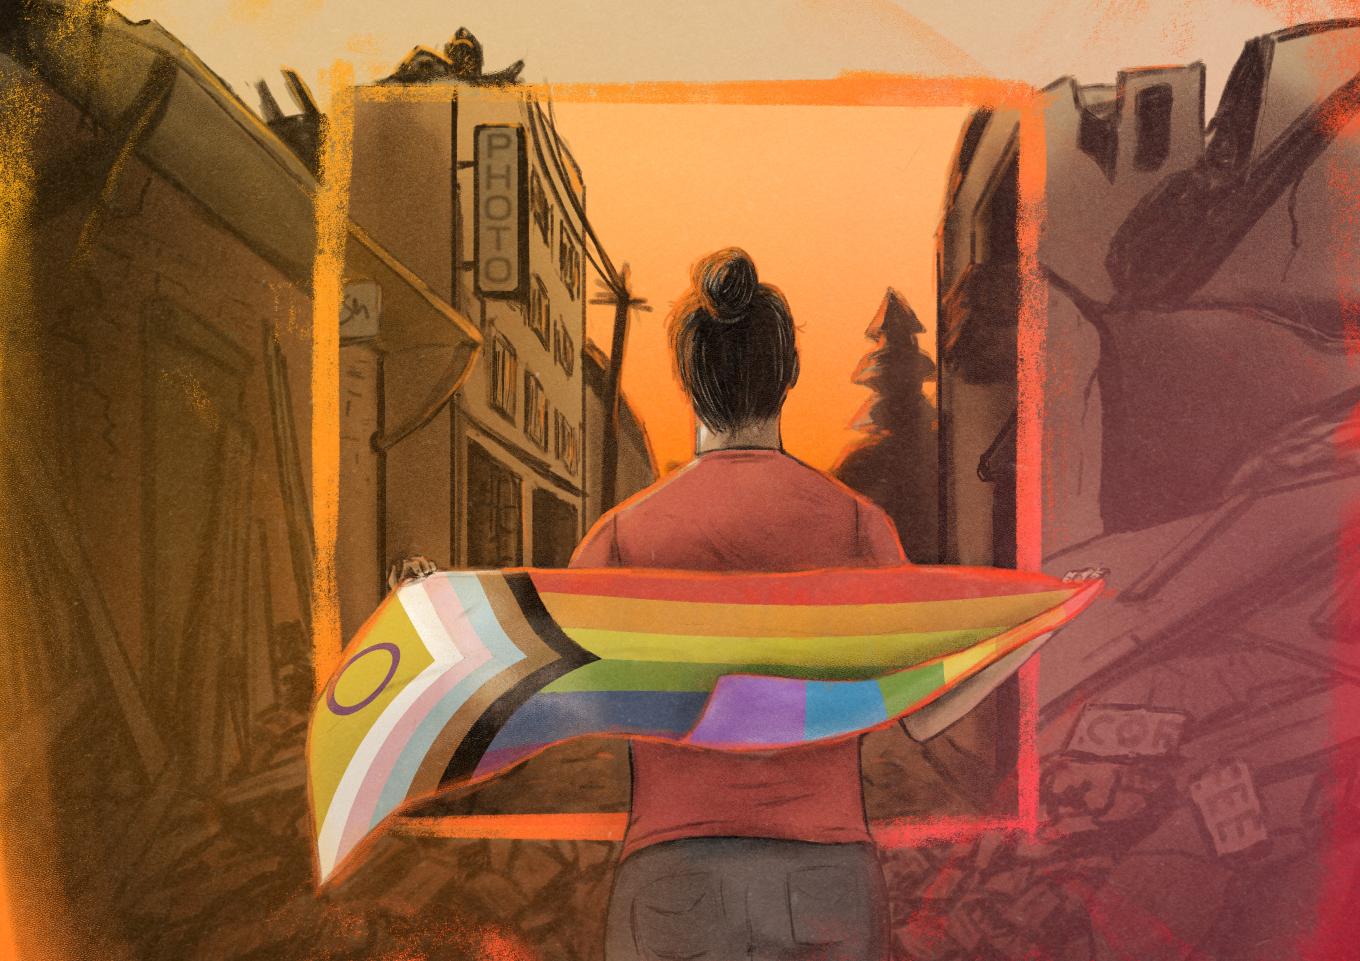 Illlustration of person with back turned holding the progressive Pride flag in front of a destroyed landscape